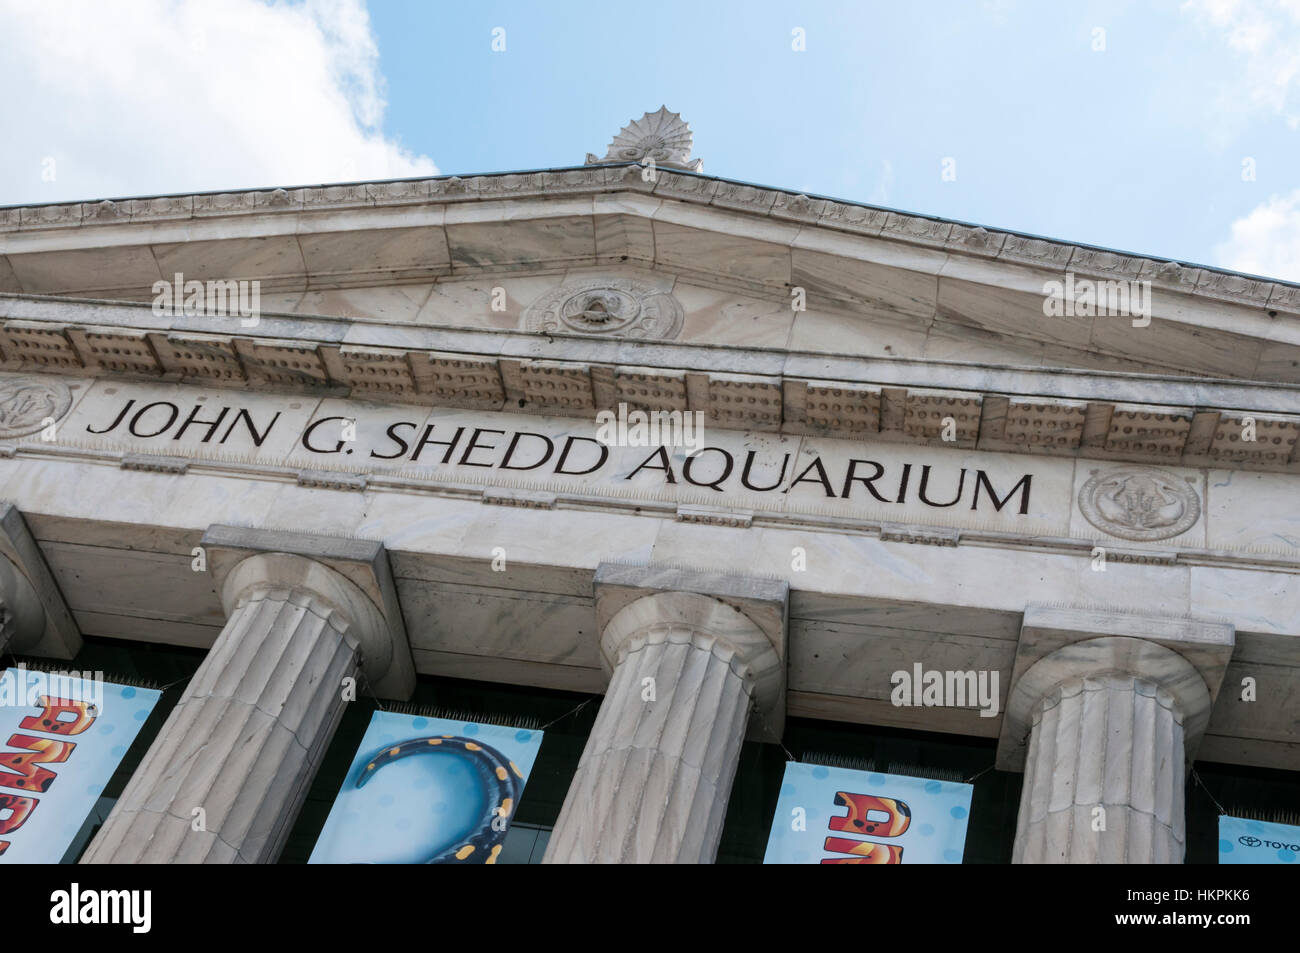 The front of the John G. Shedd Aquarium in Chicago is decorated with carvings of shells, fish & other marine animals. Stock Photo